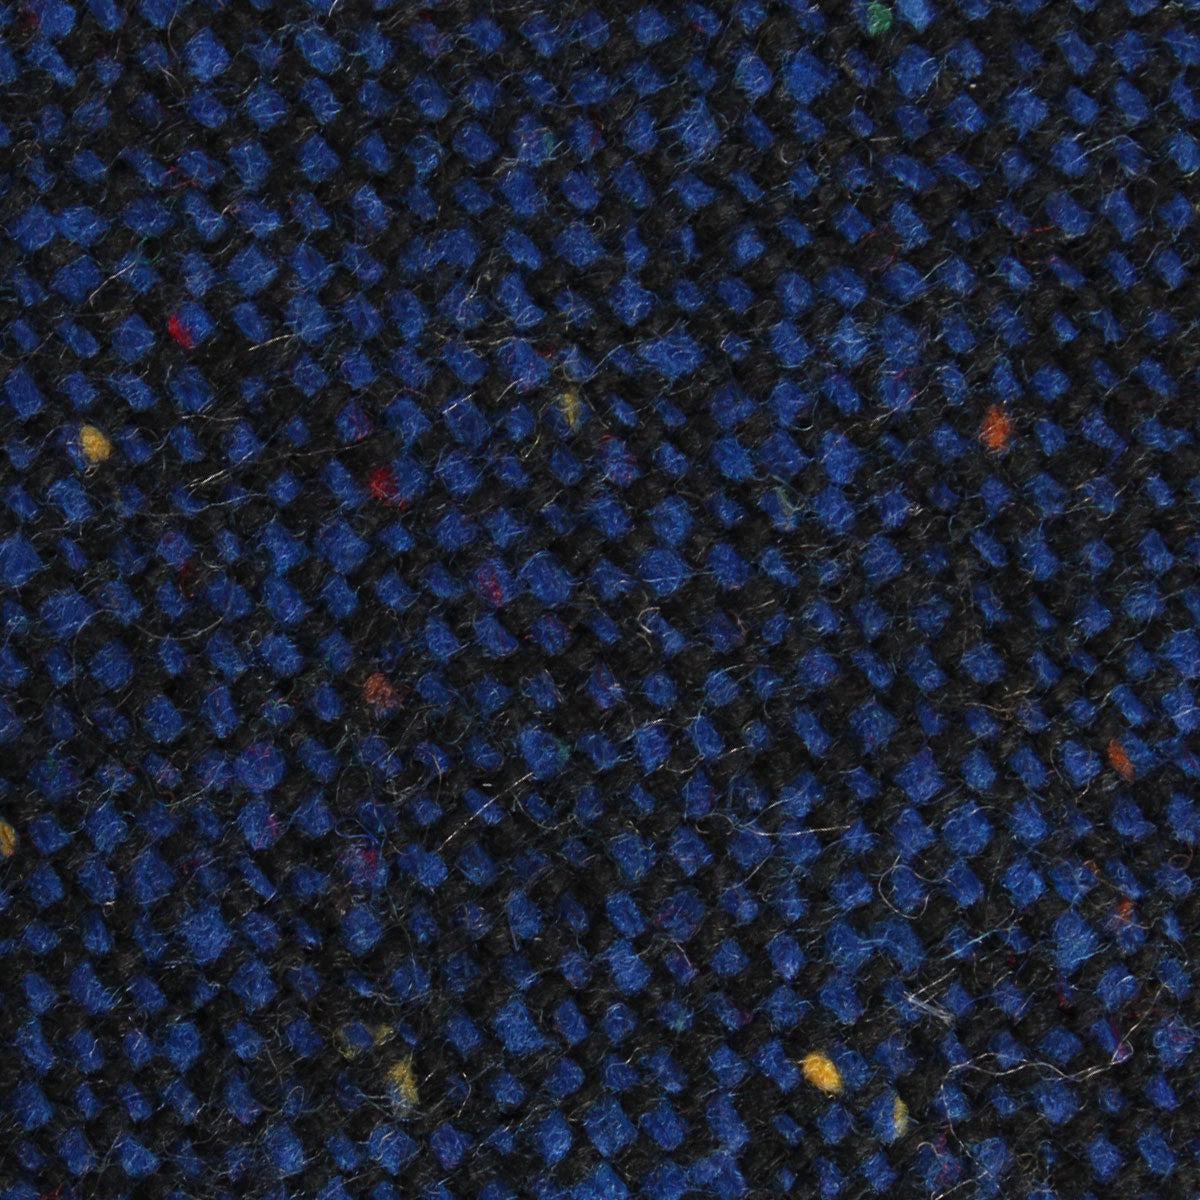 Speckles on Blue Donegal Fabric Pocket Square